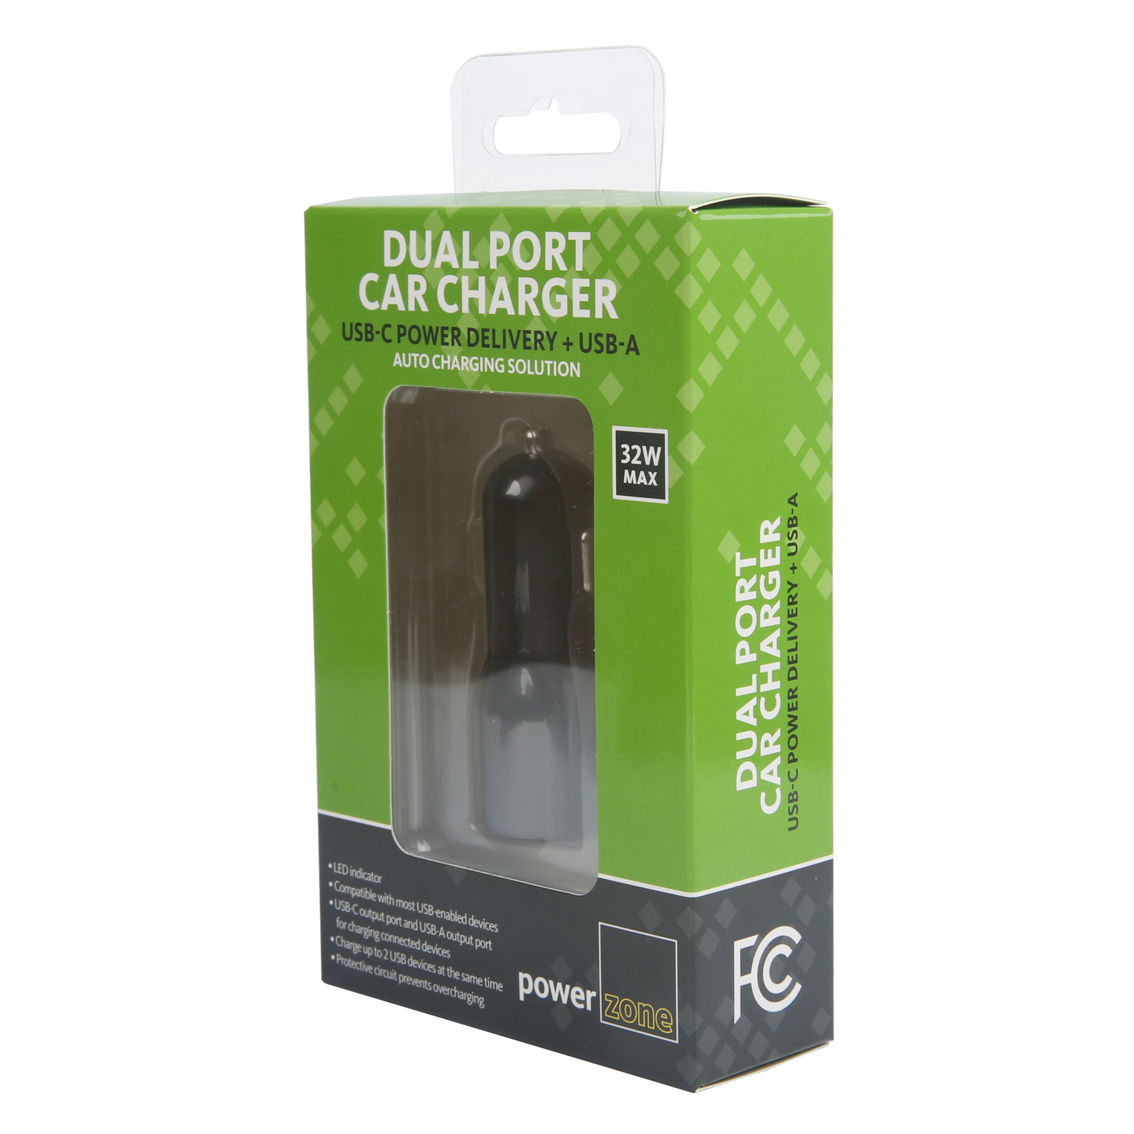 Powerzone Car Charger with USB-C and USB-A Dual Charging Ports - Image 5 of 5